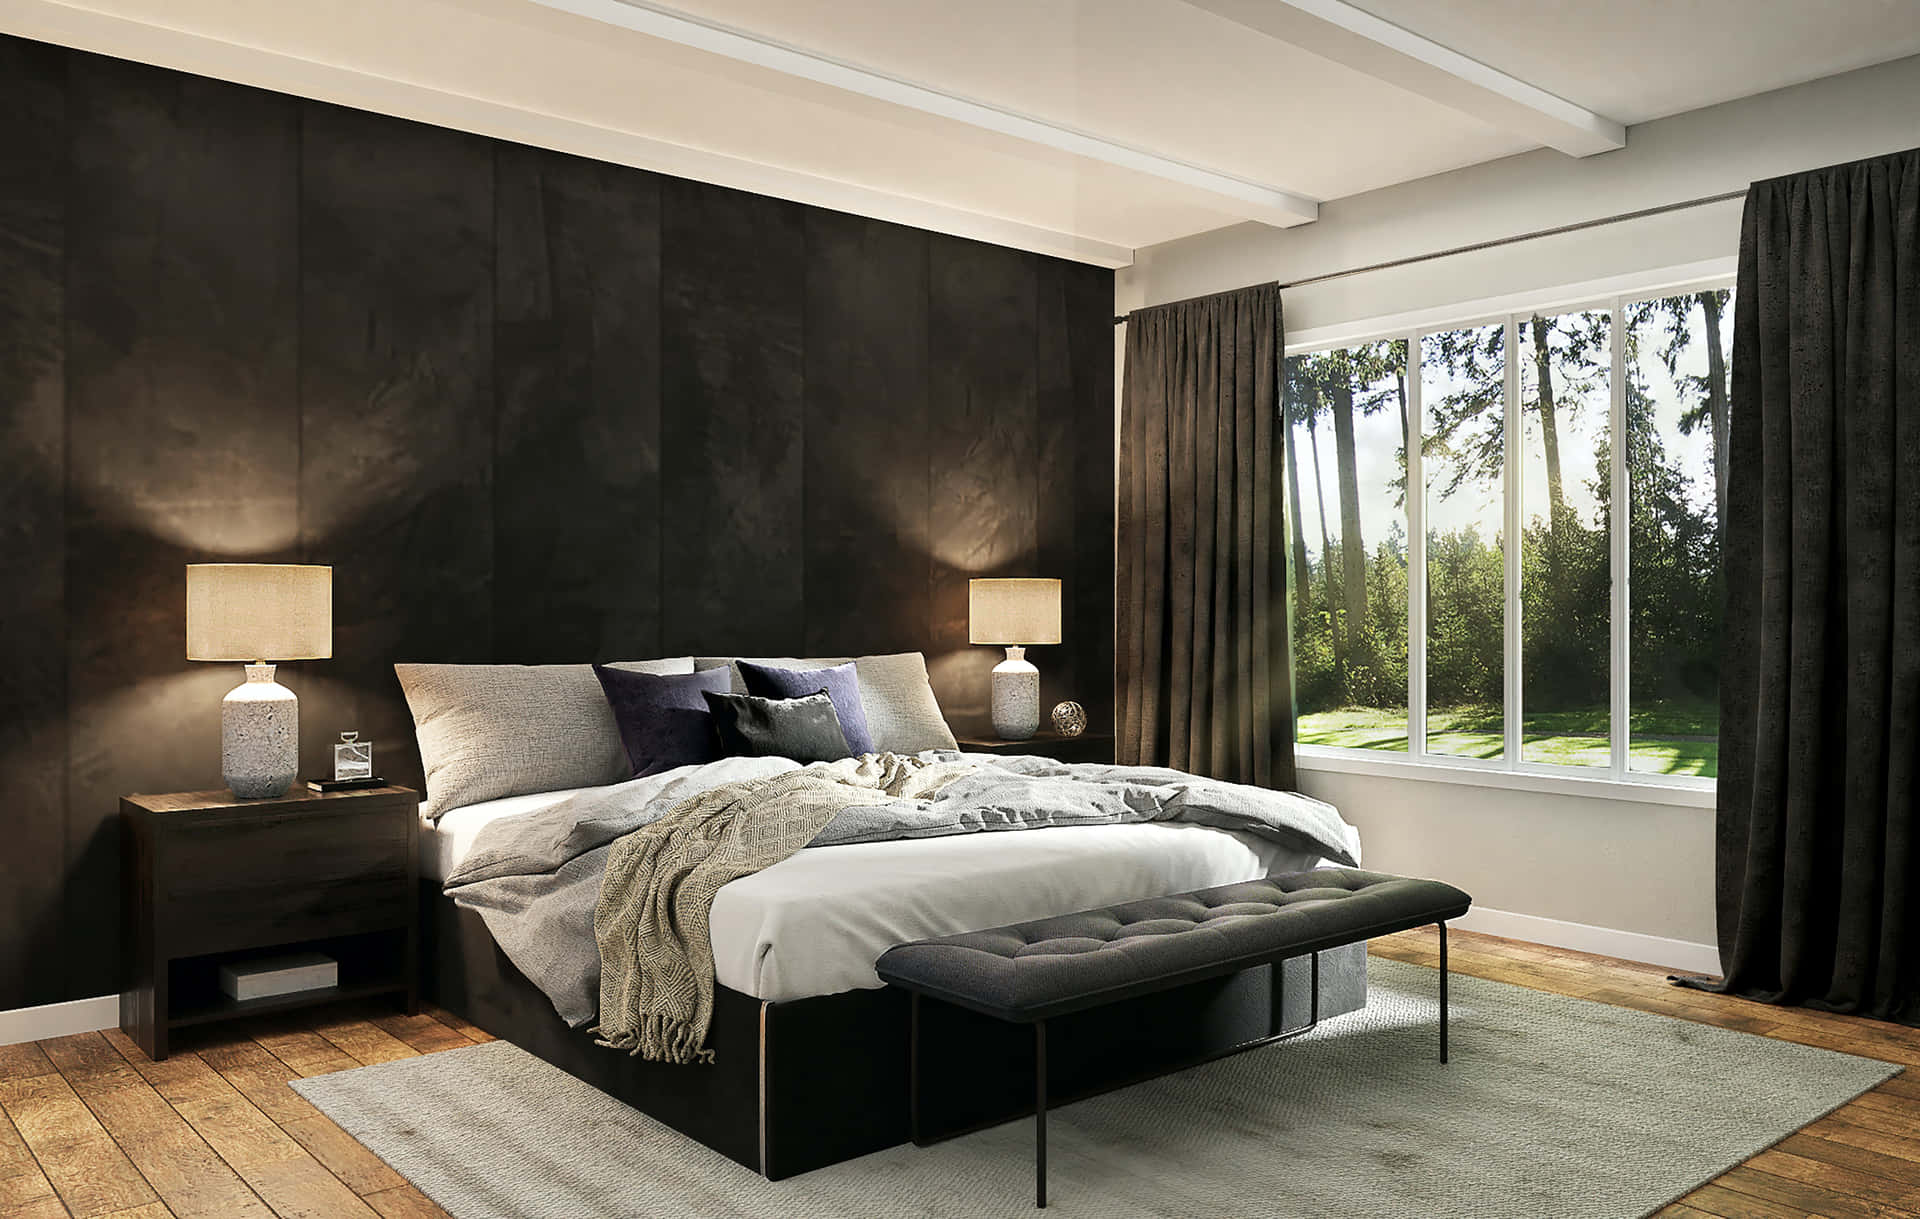 A Bedroom With Black Walls And Wooden Floors